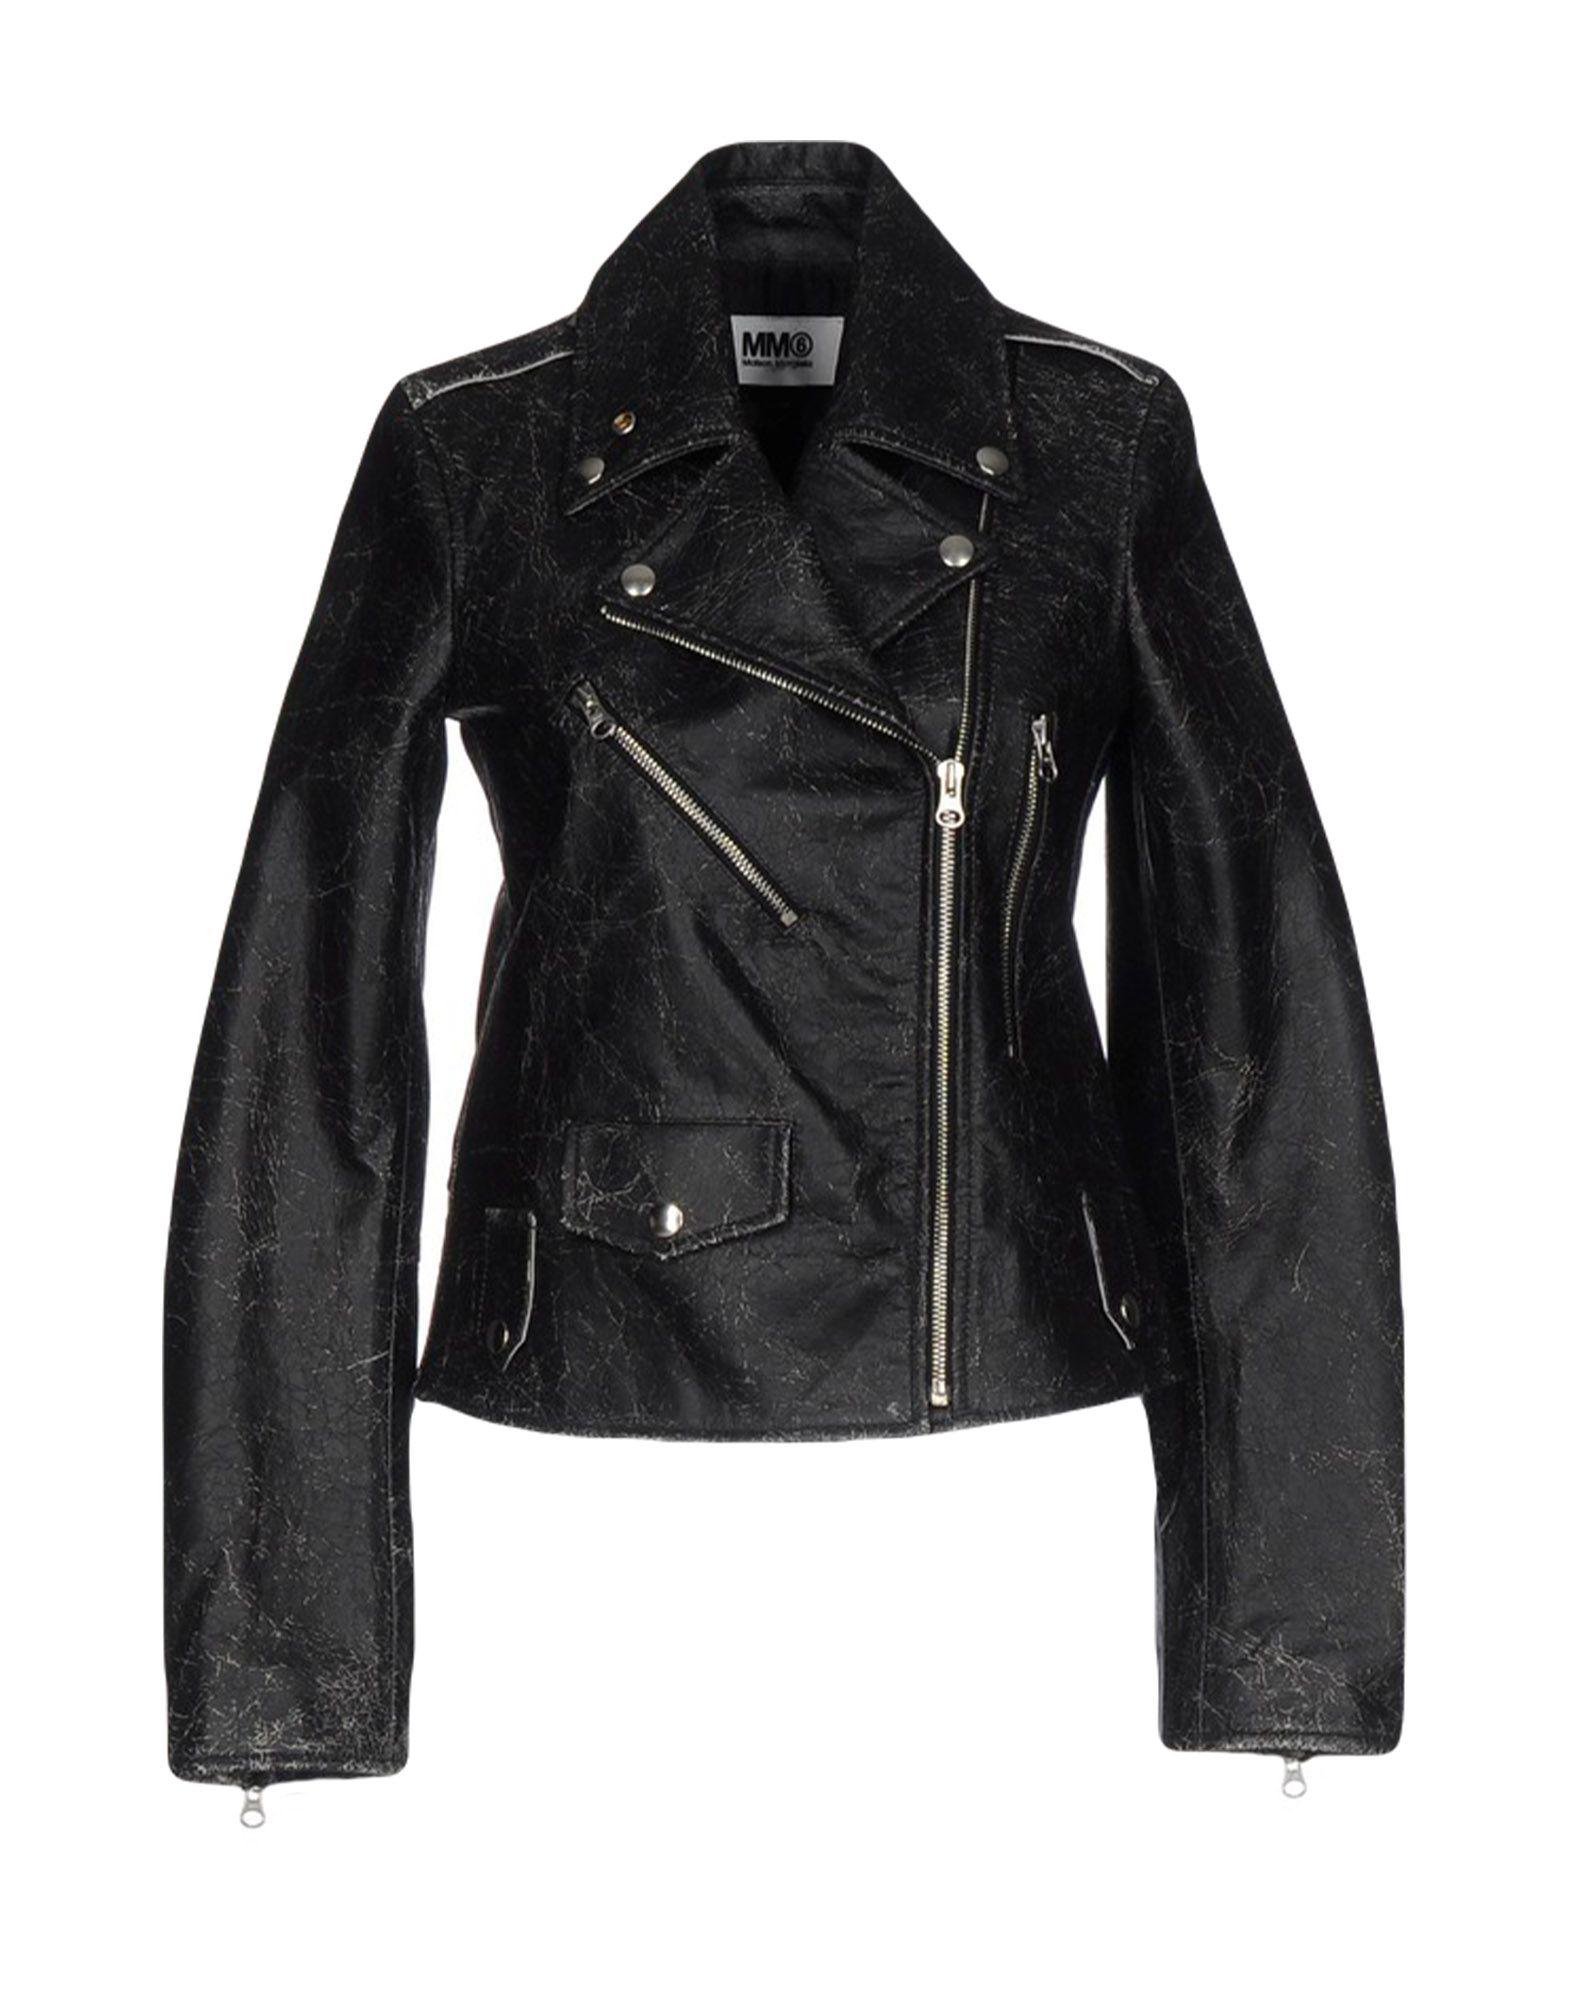 MM6 by Maison Martin Margiela Leather Jacket in Black - Lyst